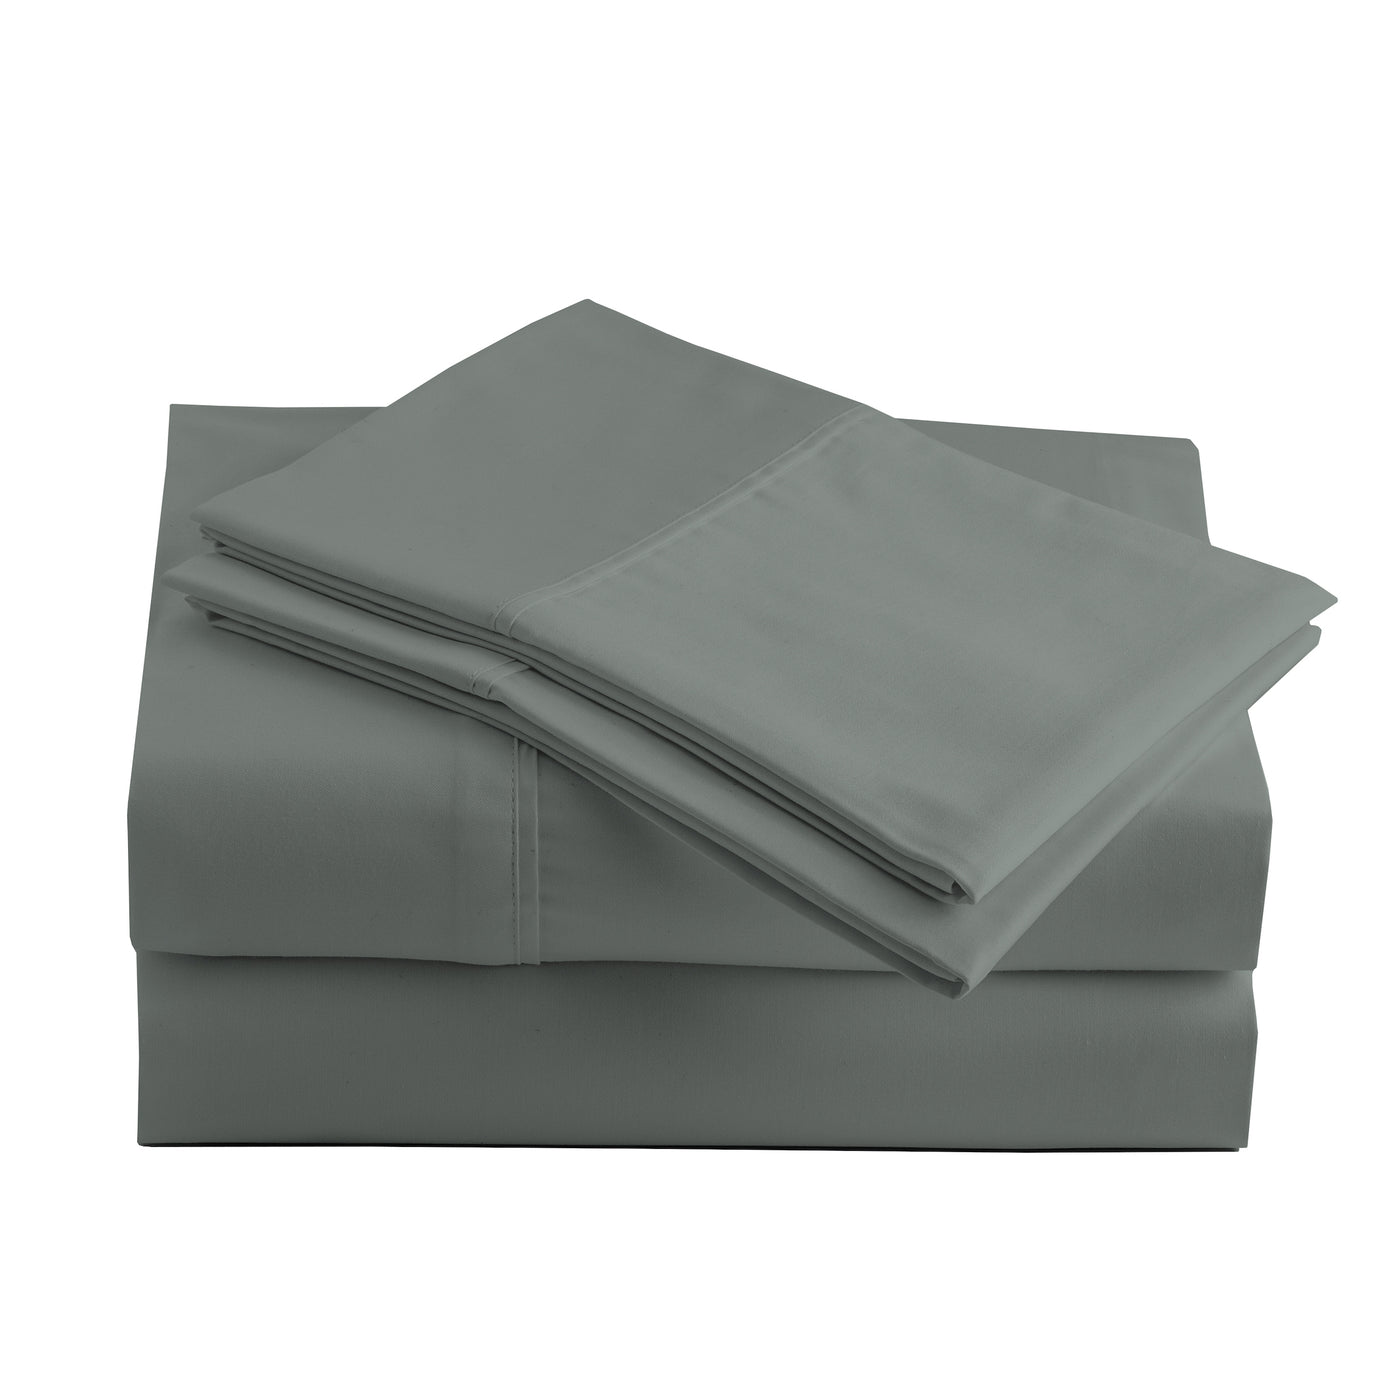 415 Thread Count Percale Bed Sheet Set | Nightwish